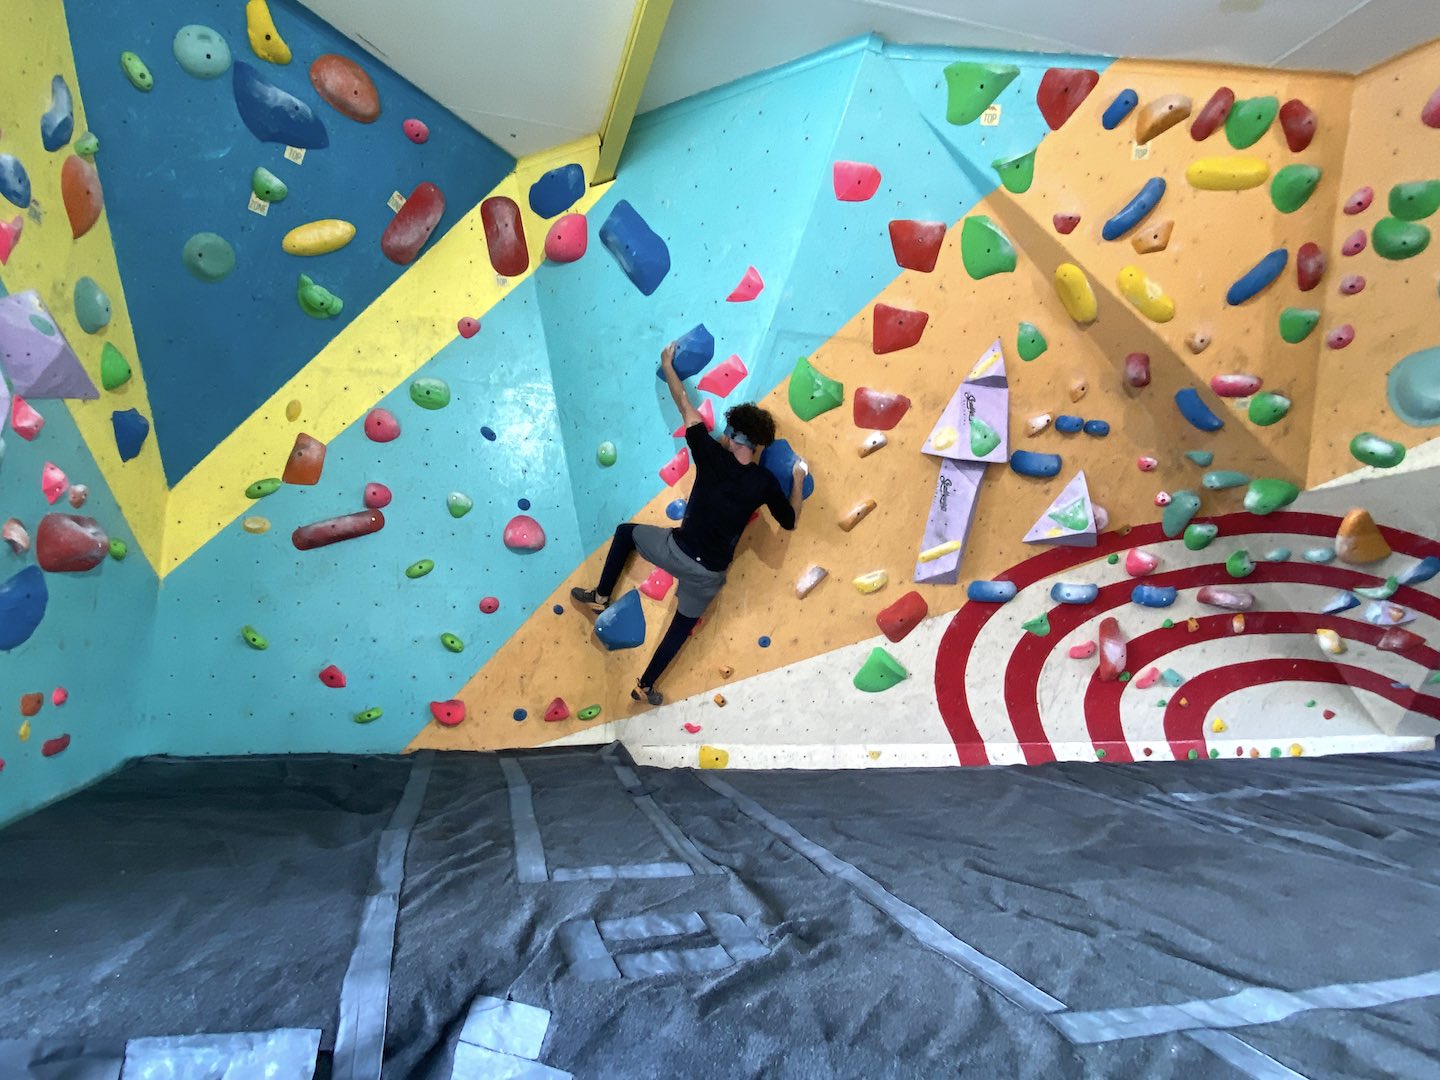 Joff Golembo climbing at Friends and Allies